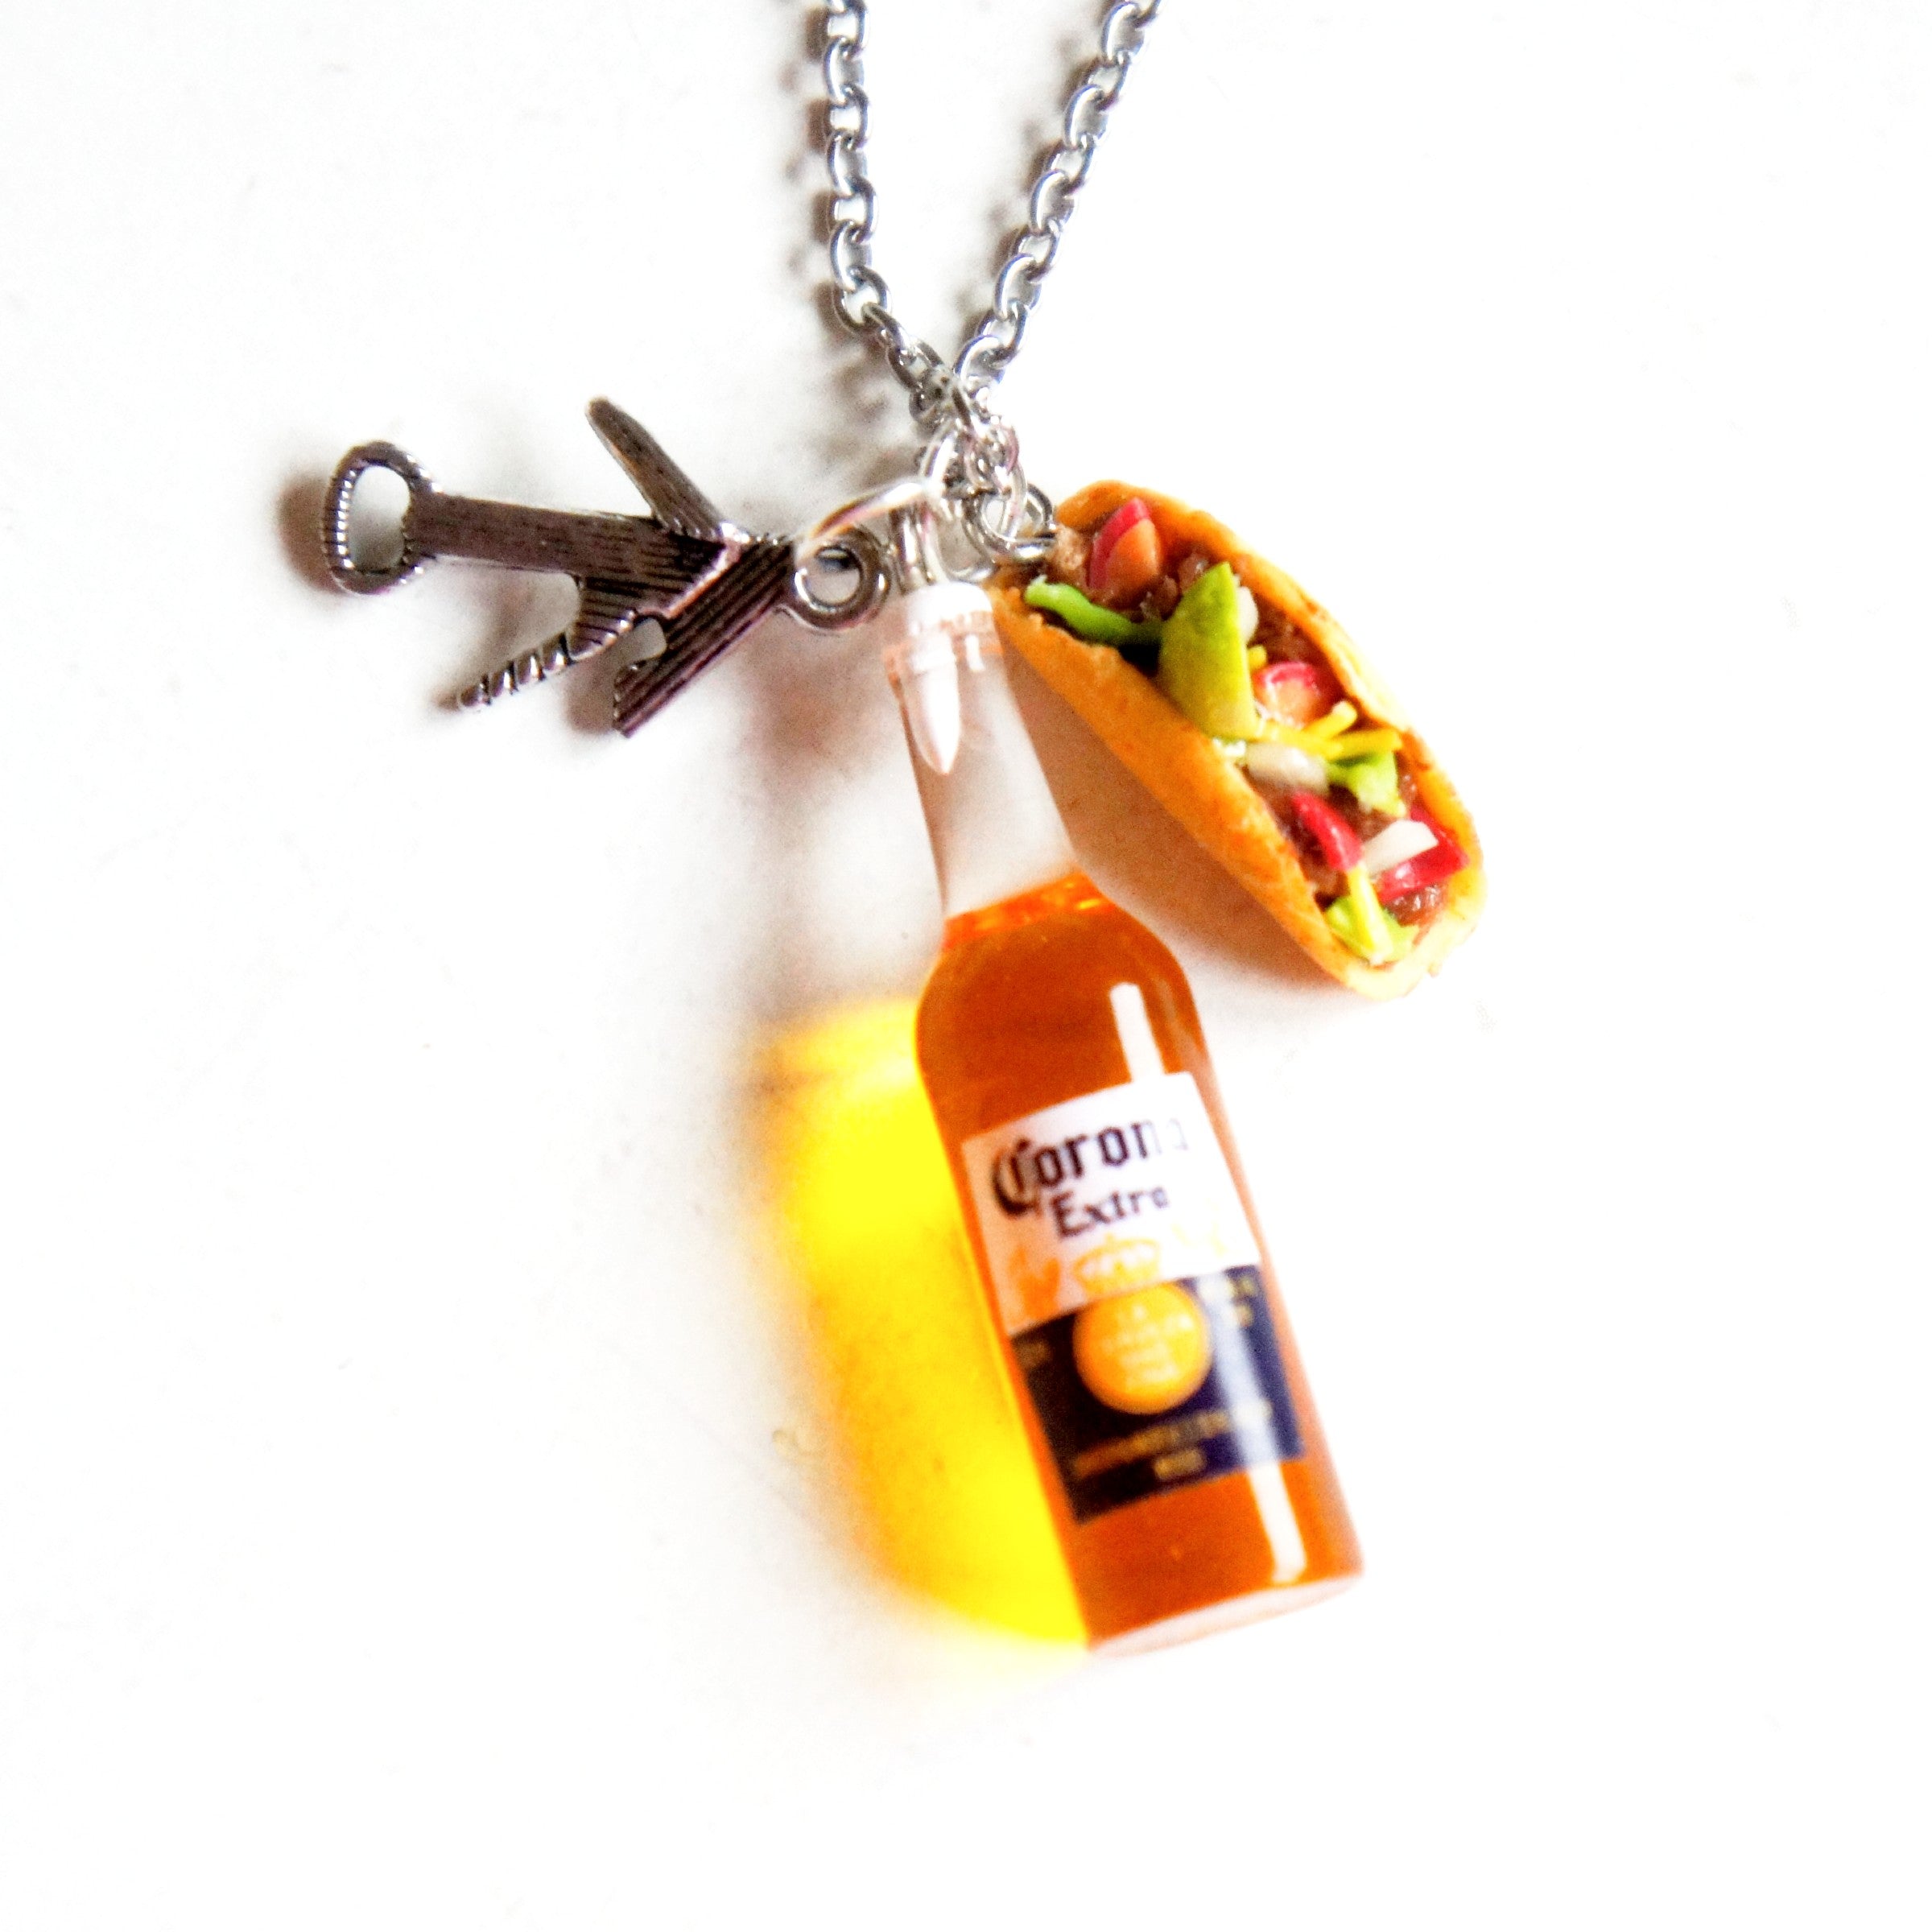 Taco Necklace - Jillicious charms and accessories